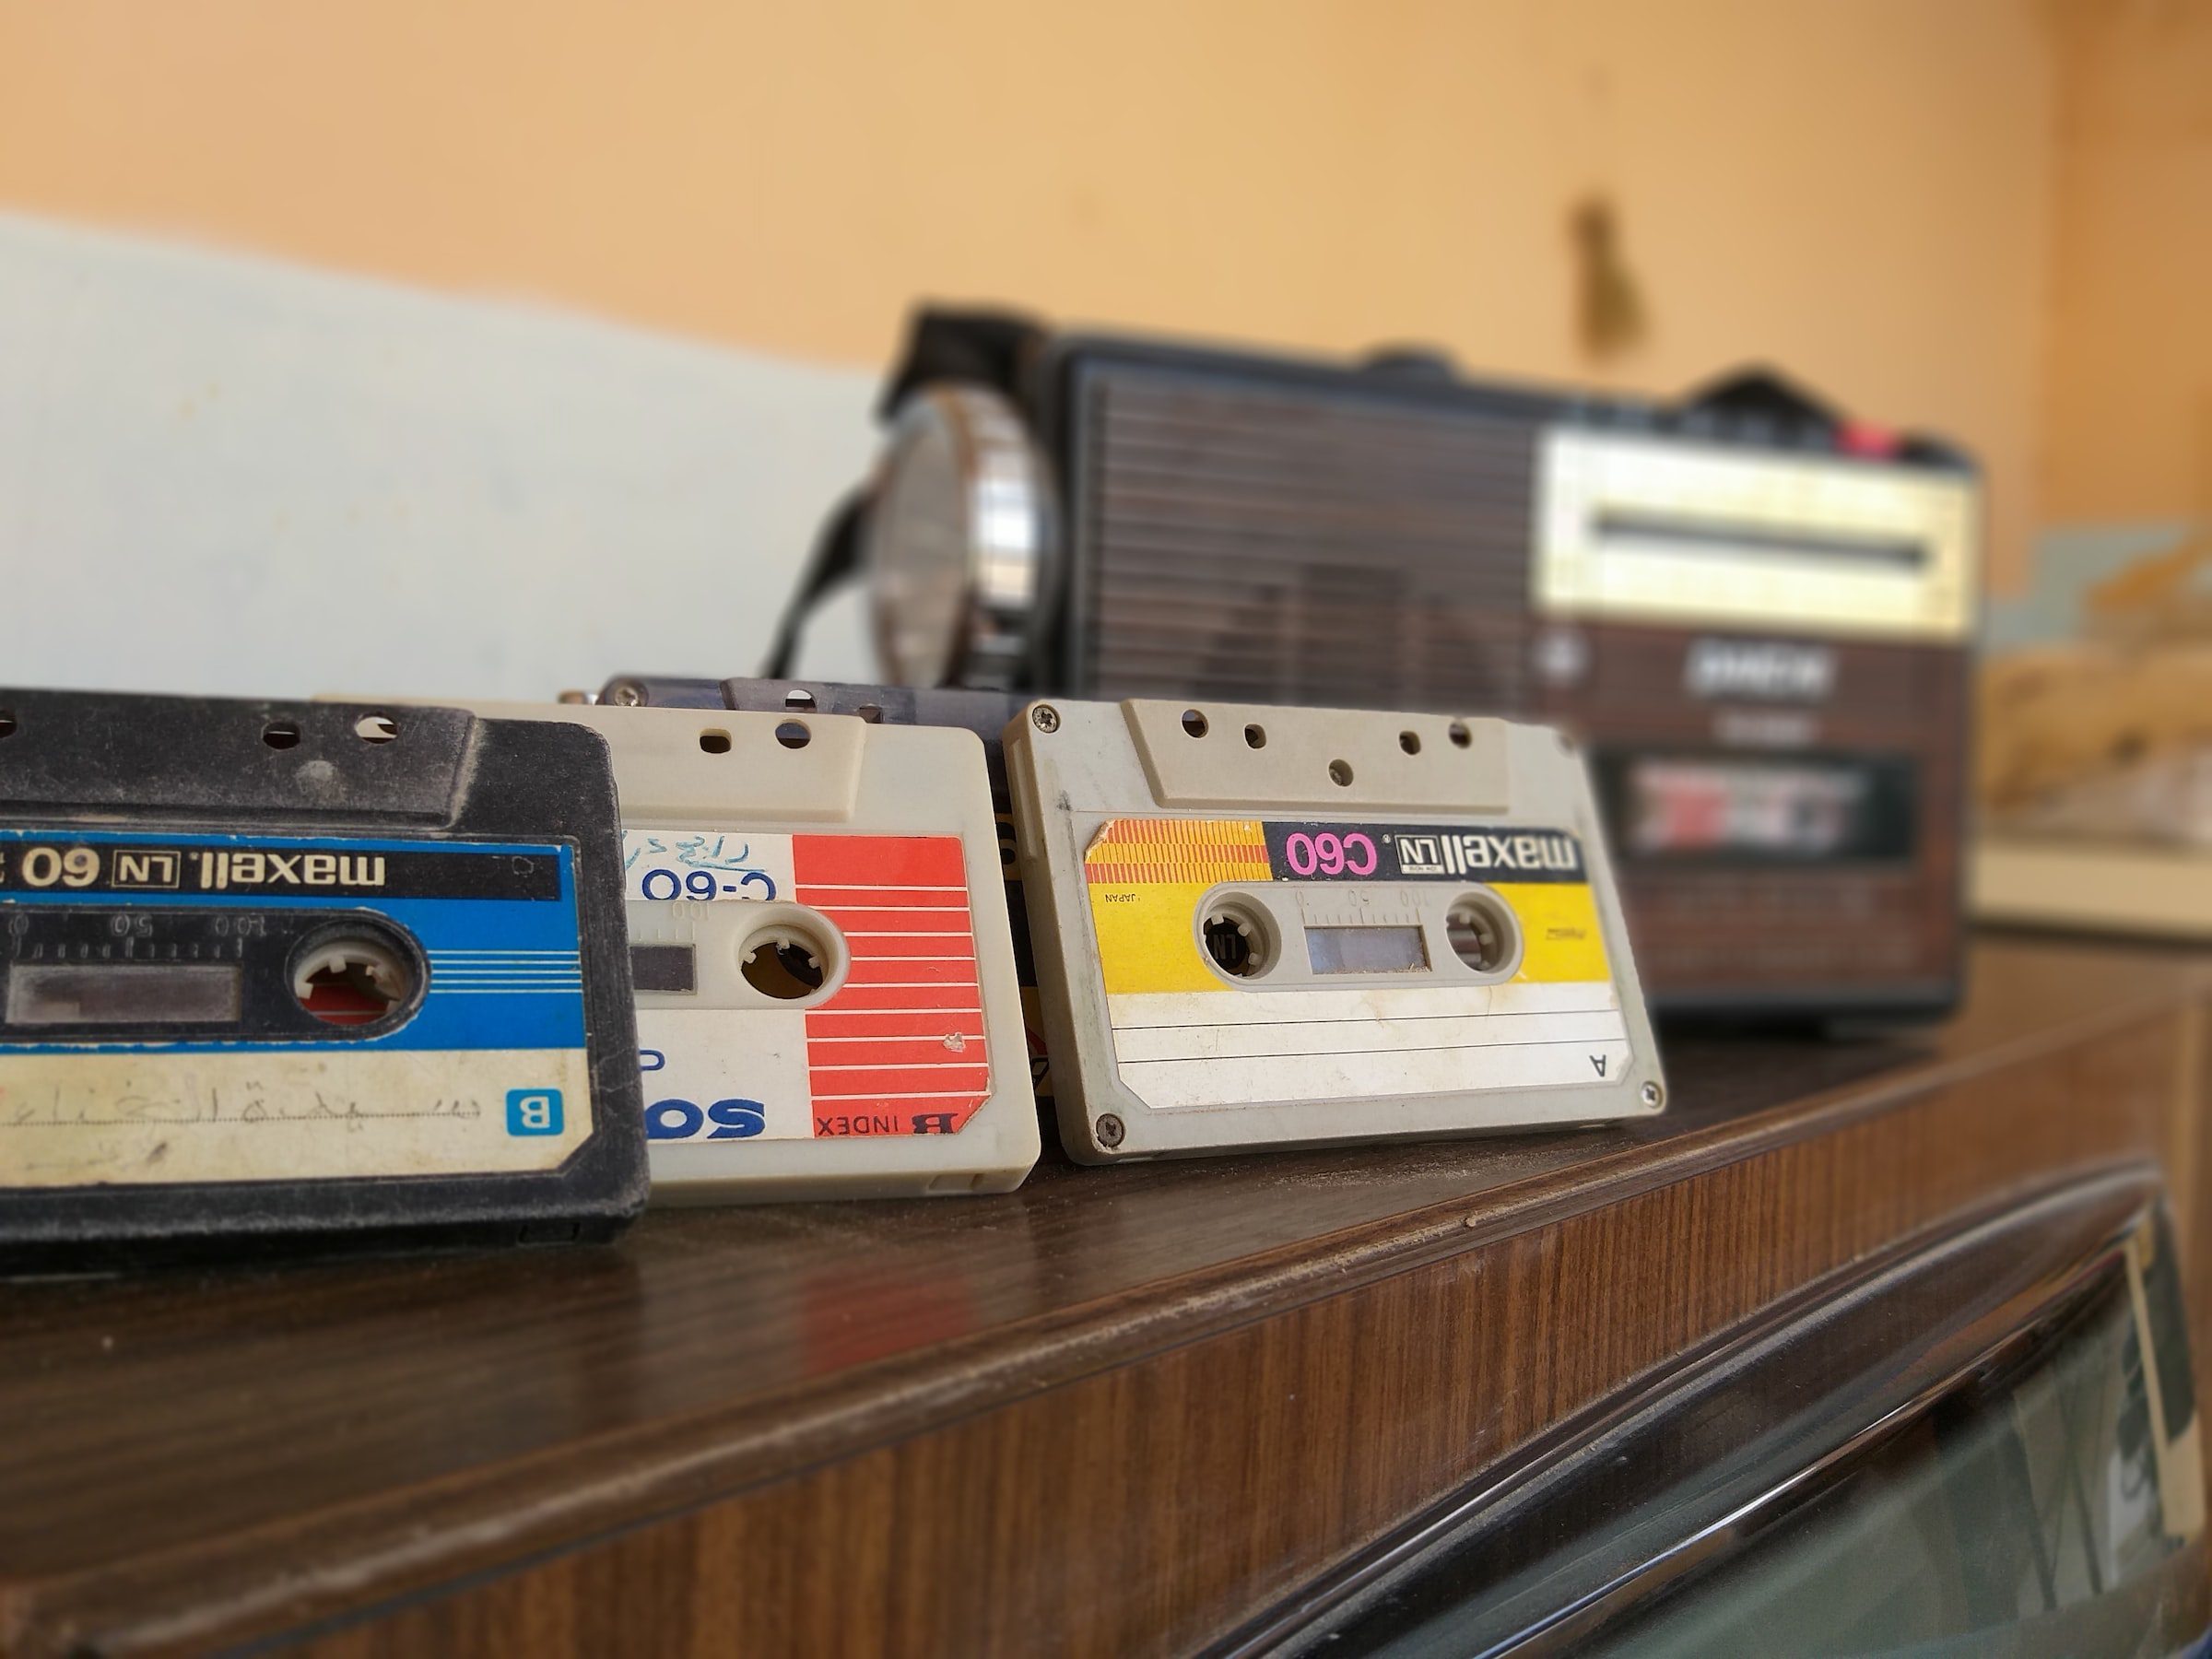 Old cassette tapes and a transistor radio, which are instrumental in the history of portable music players.